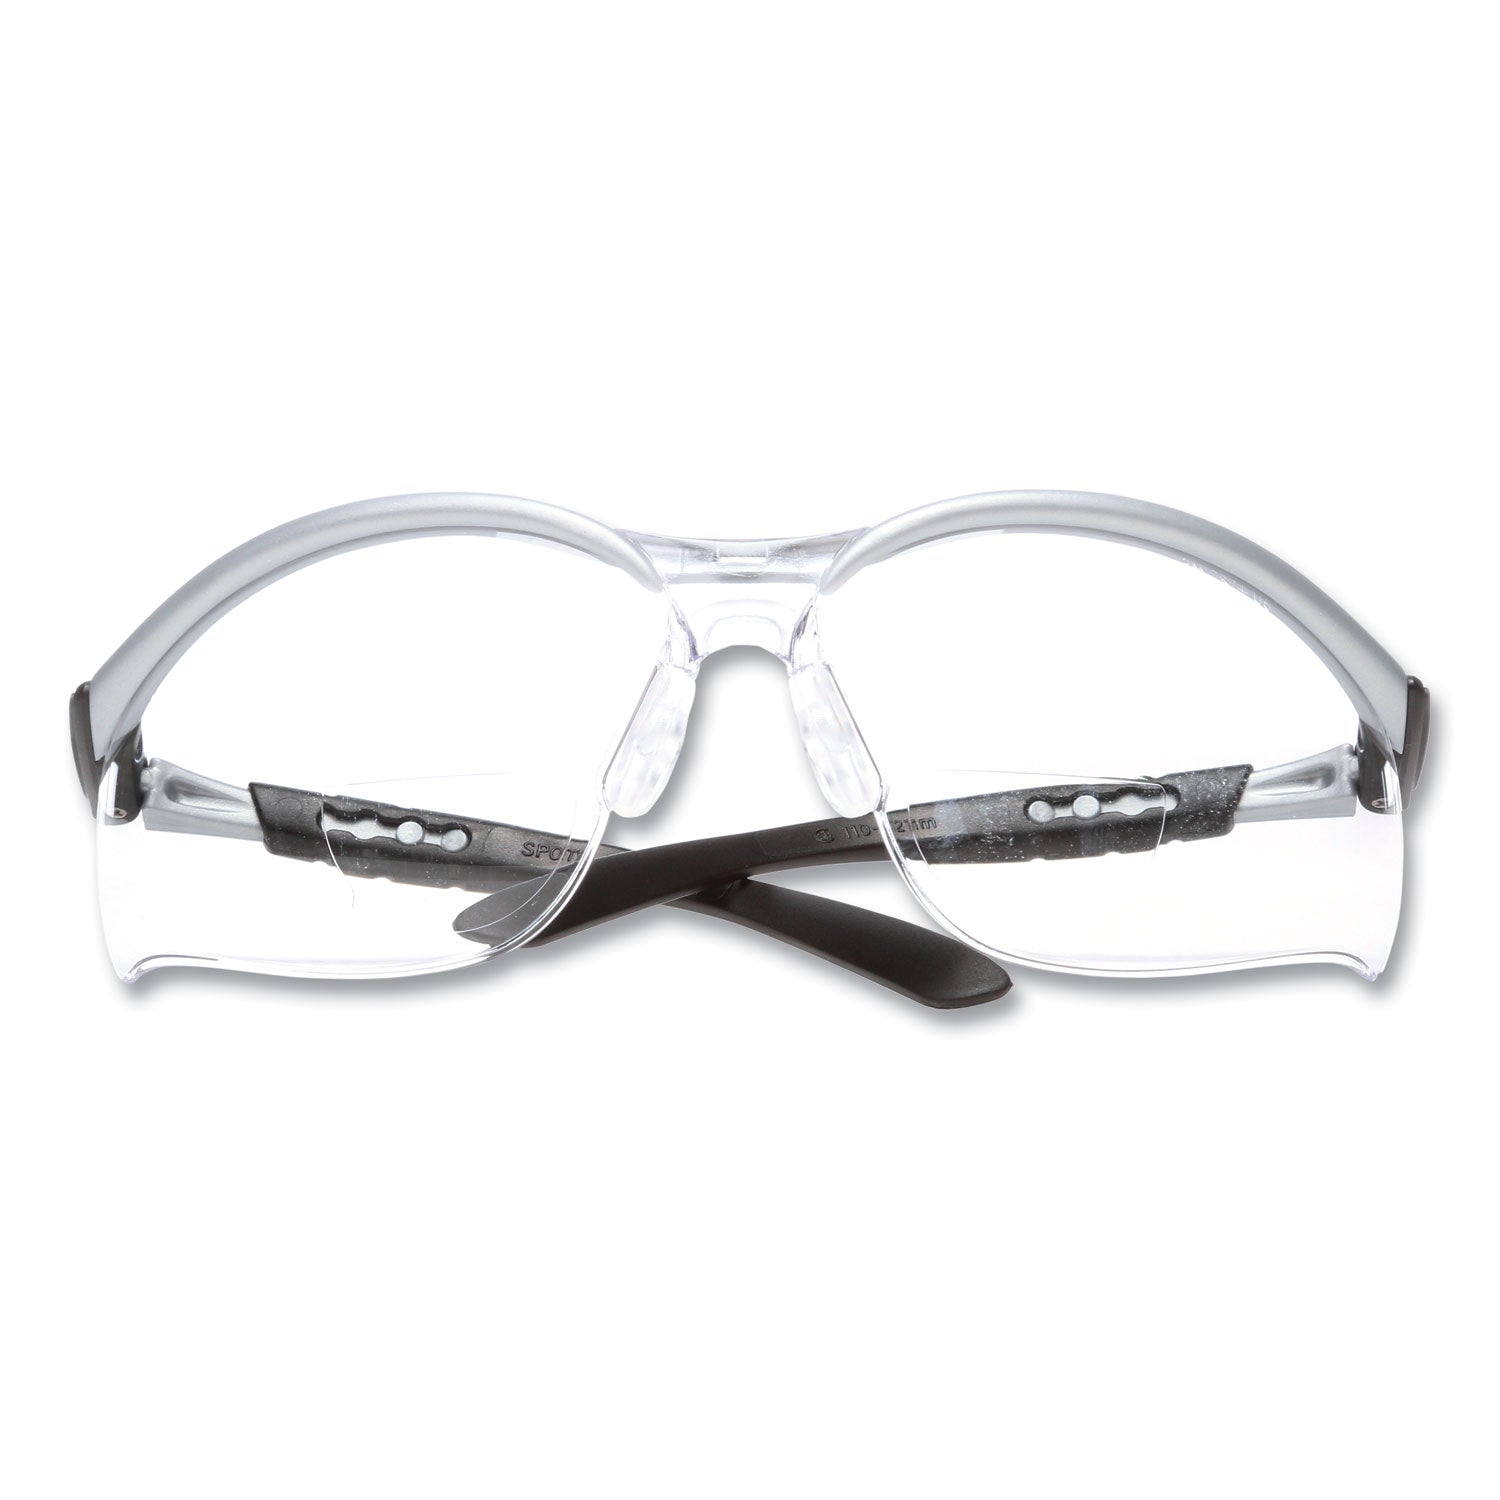 bx-molded-in-diopter-safety-glasses-25+-diopter-strength-silver-black-frame-clear-lens_mmm1137600000 - 1